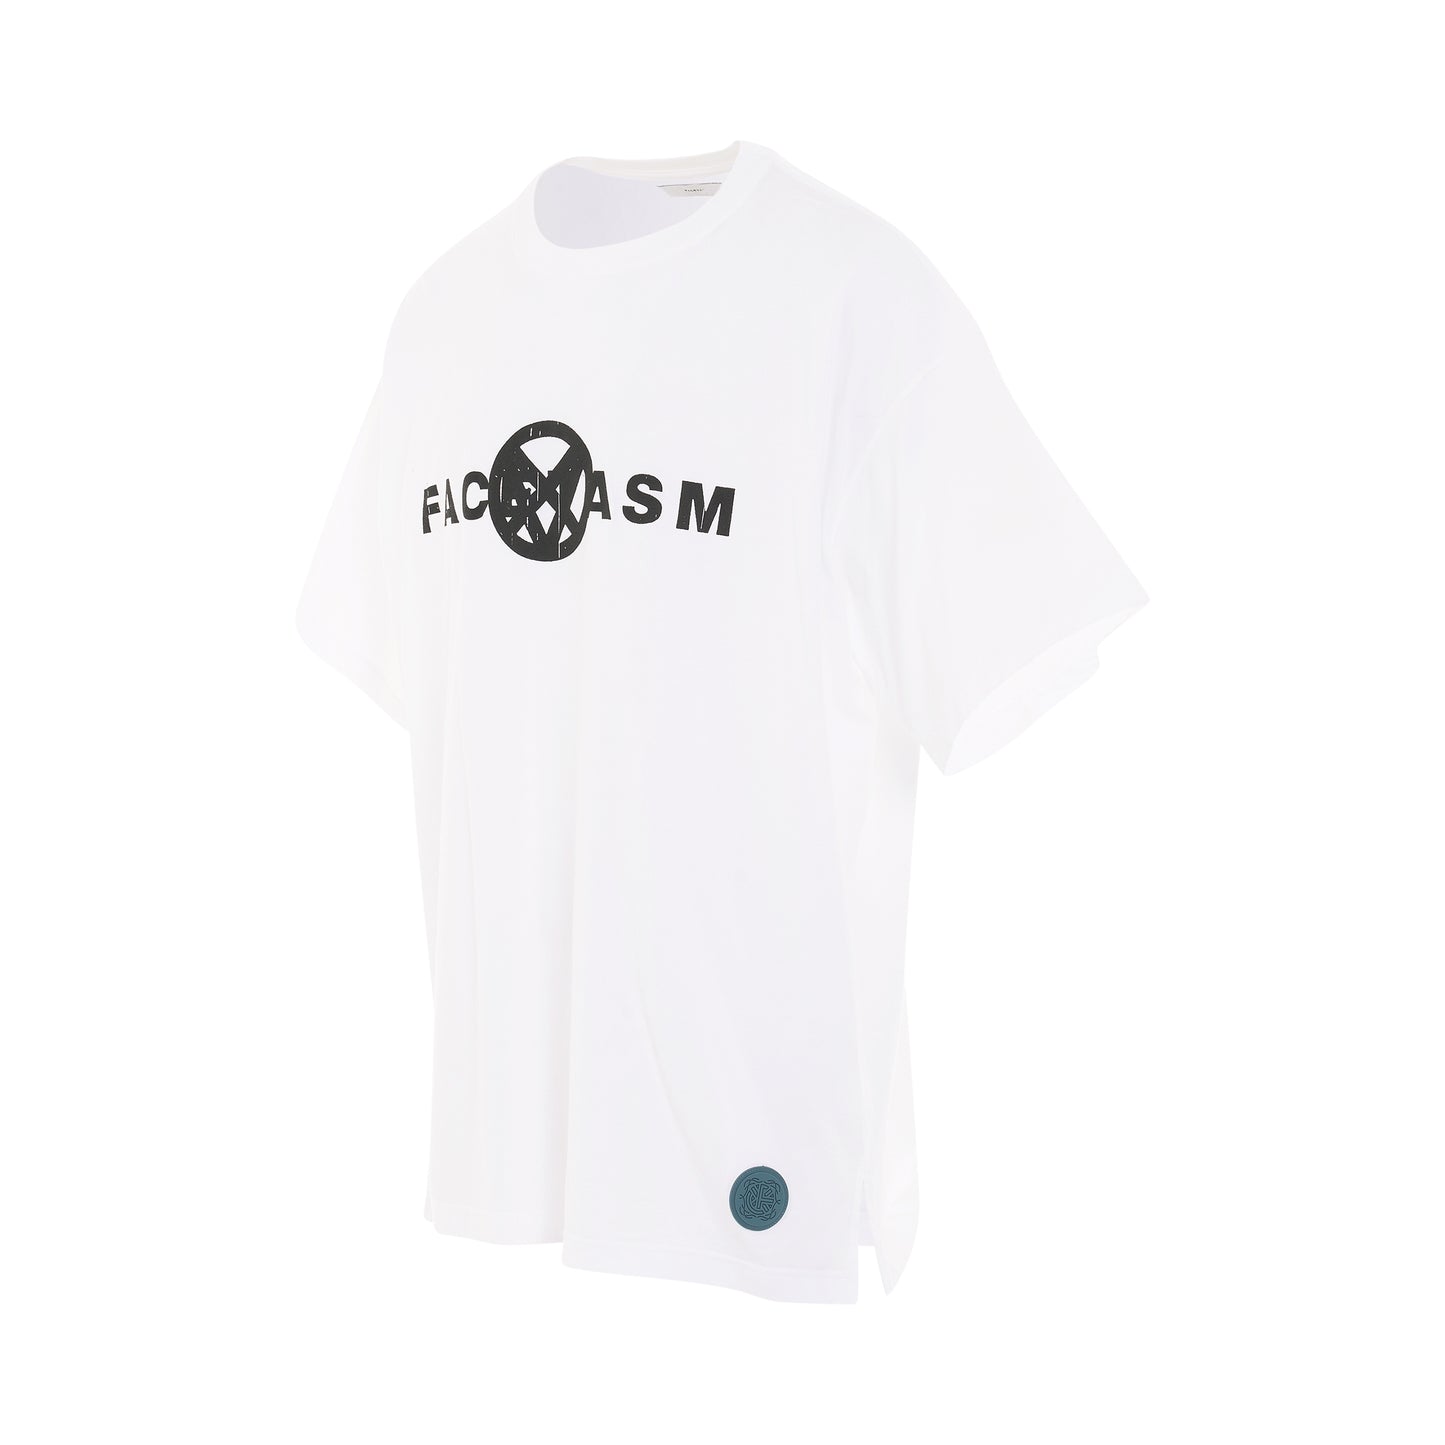 Anarchy Big T-Shirt in White